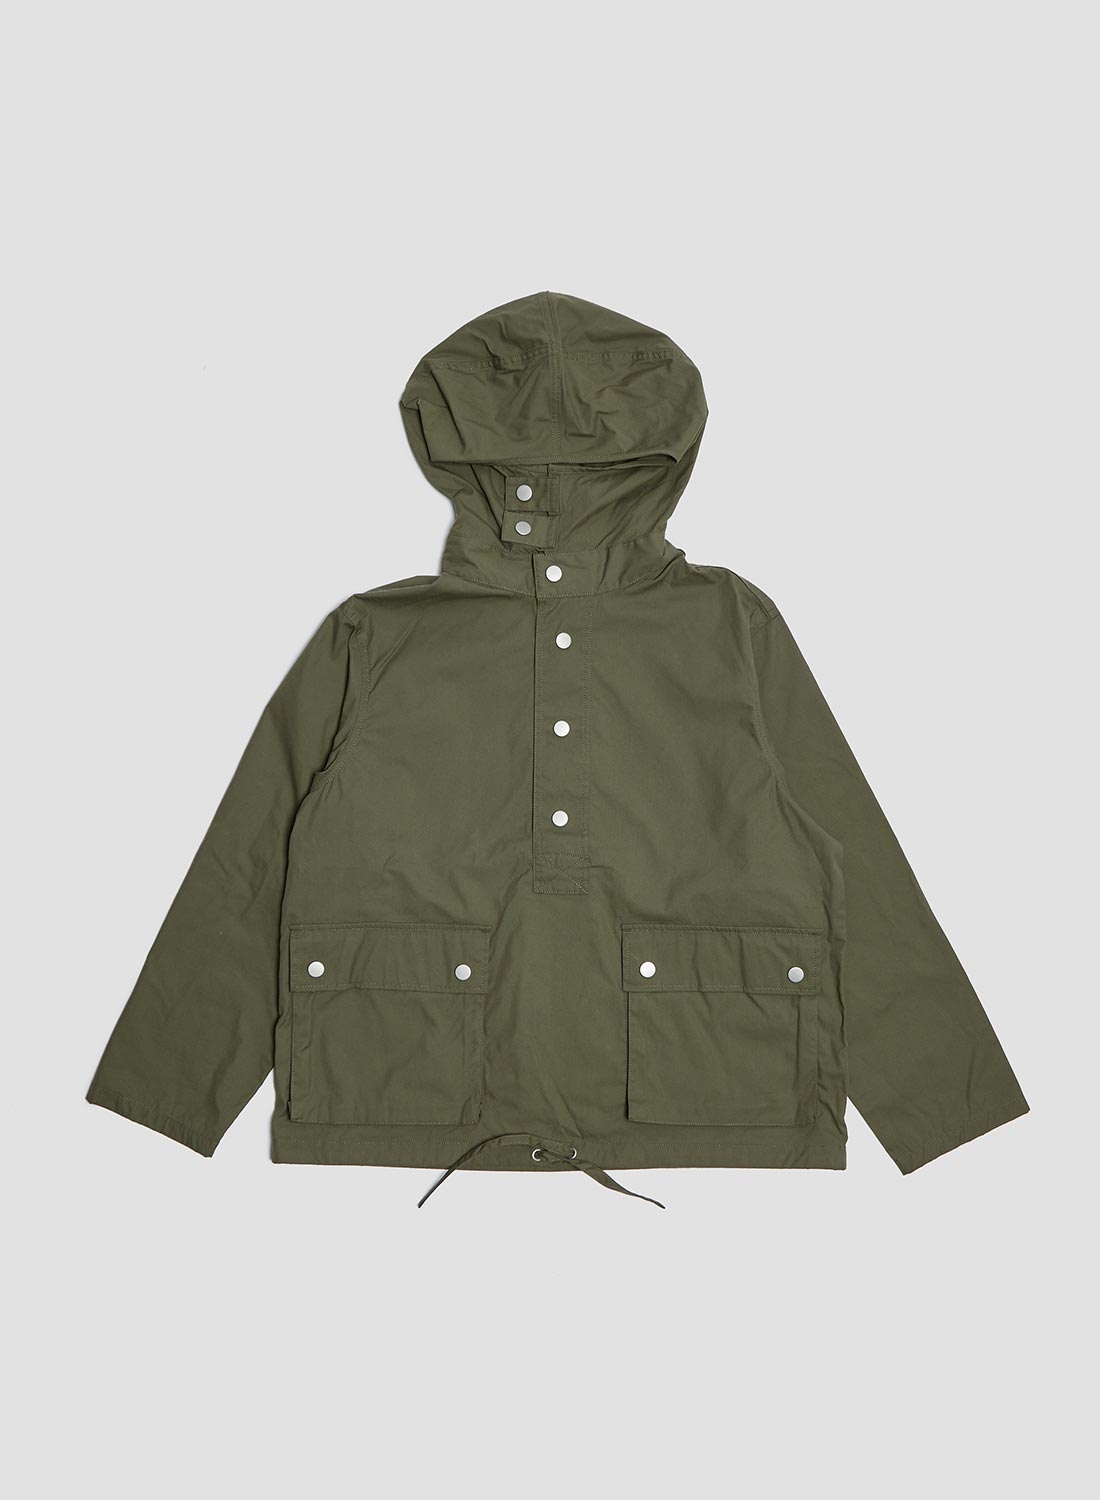 Nigel Cabourn Strap Smock in Army | REVERSIBLE